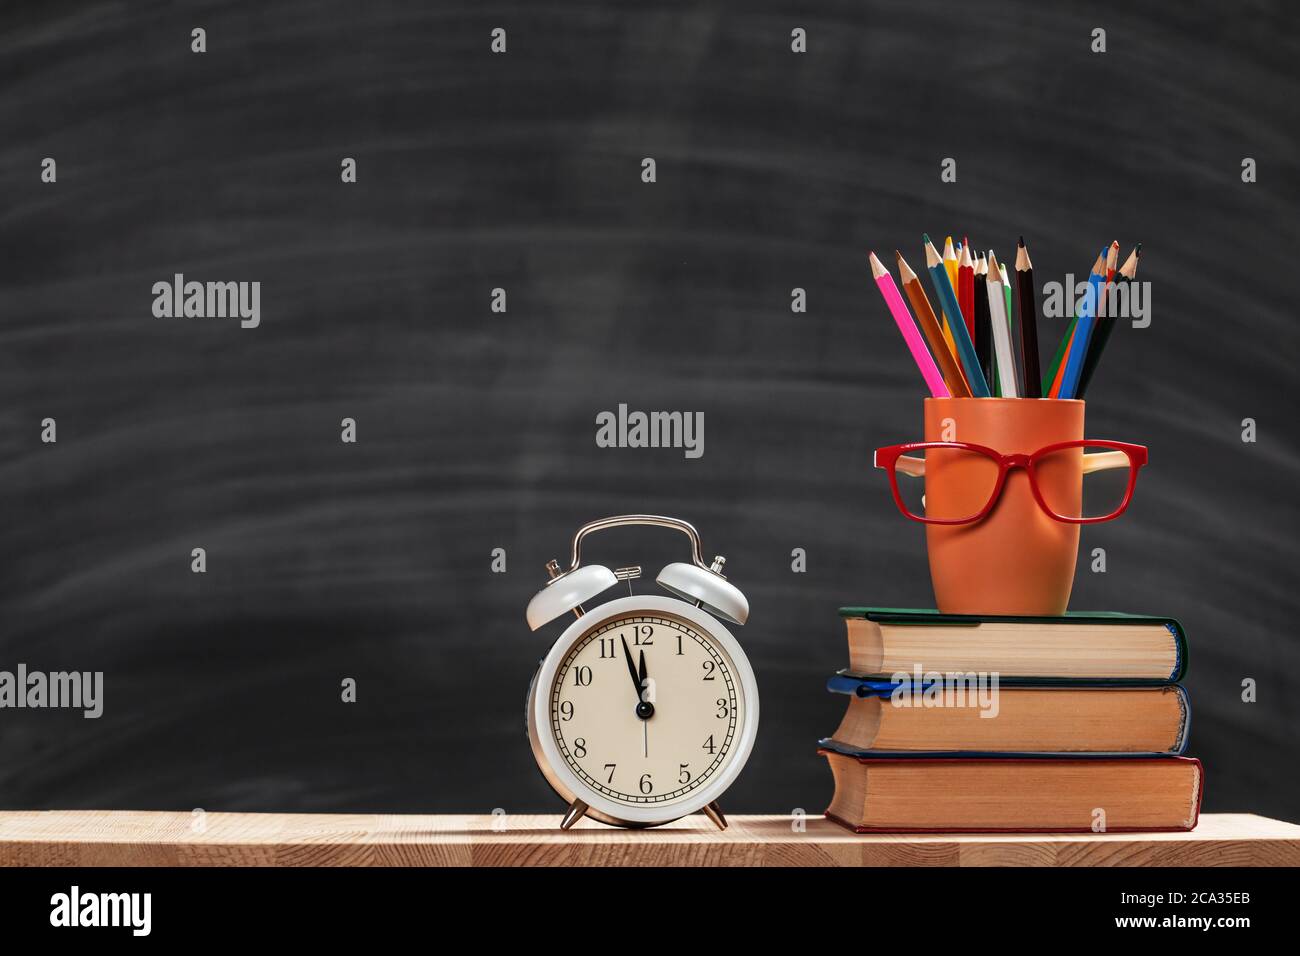 Student set. A stack of books, pencils, an alarm clock, glasses on the background of a school black board. Education concept. Copy space. Stock Photo